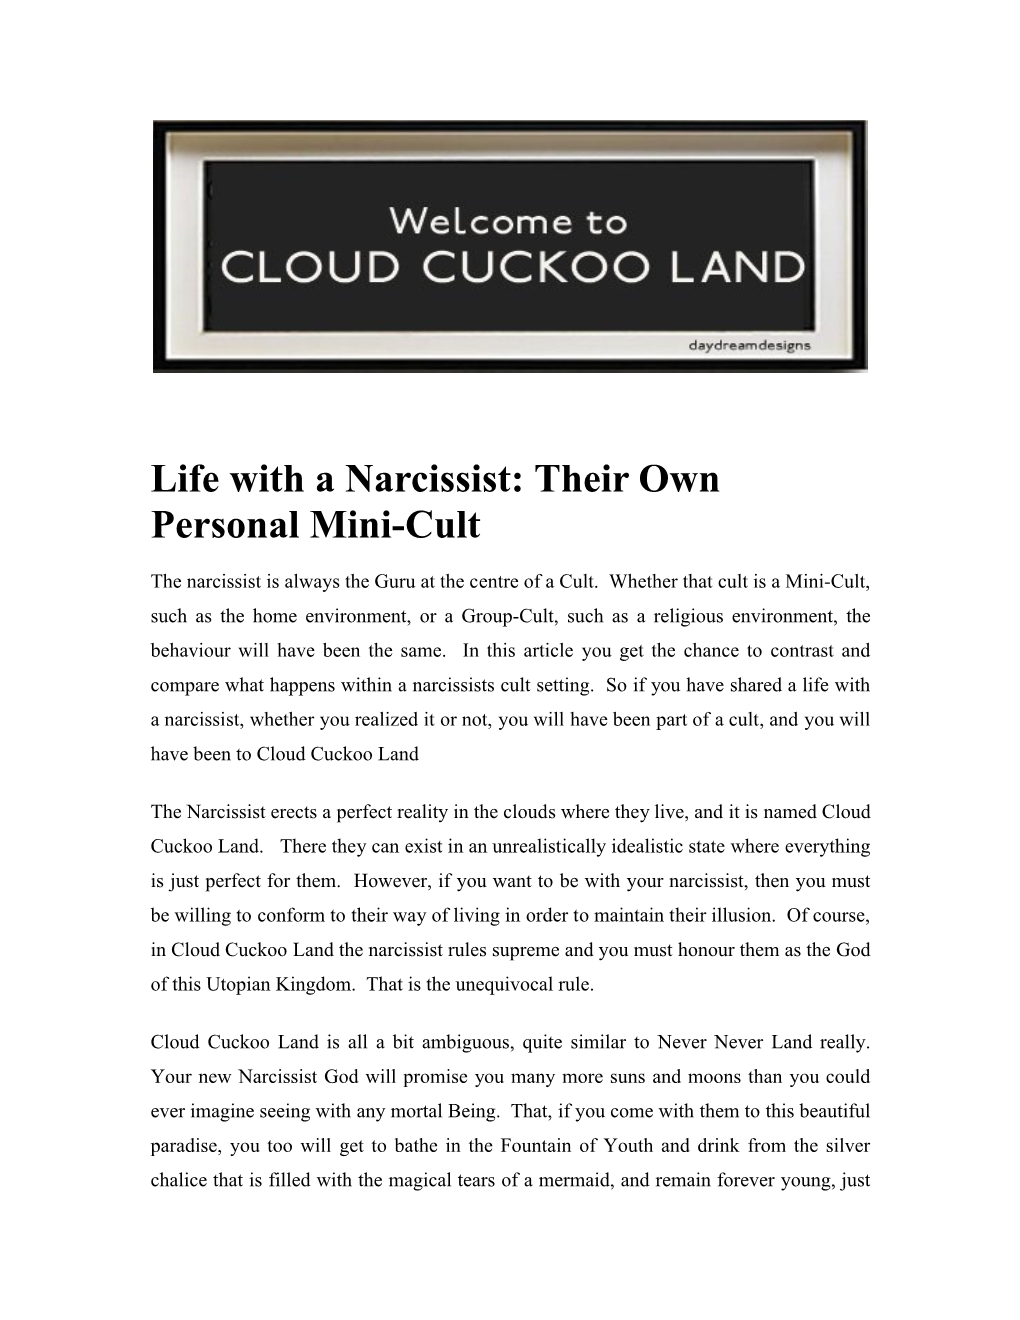 Life with a Narcissist: Their Own Personal Mini-Cult